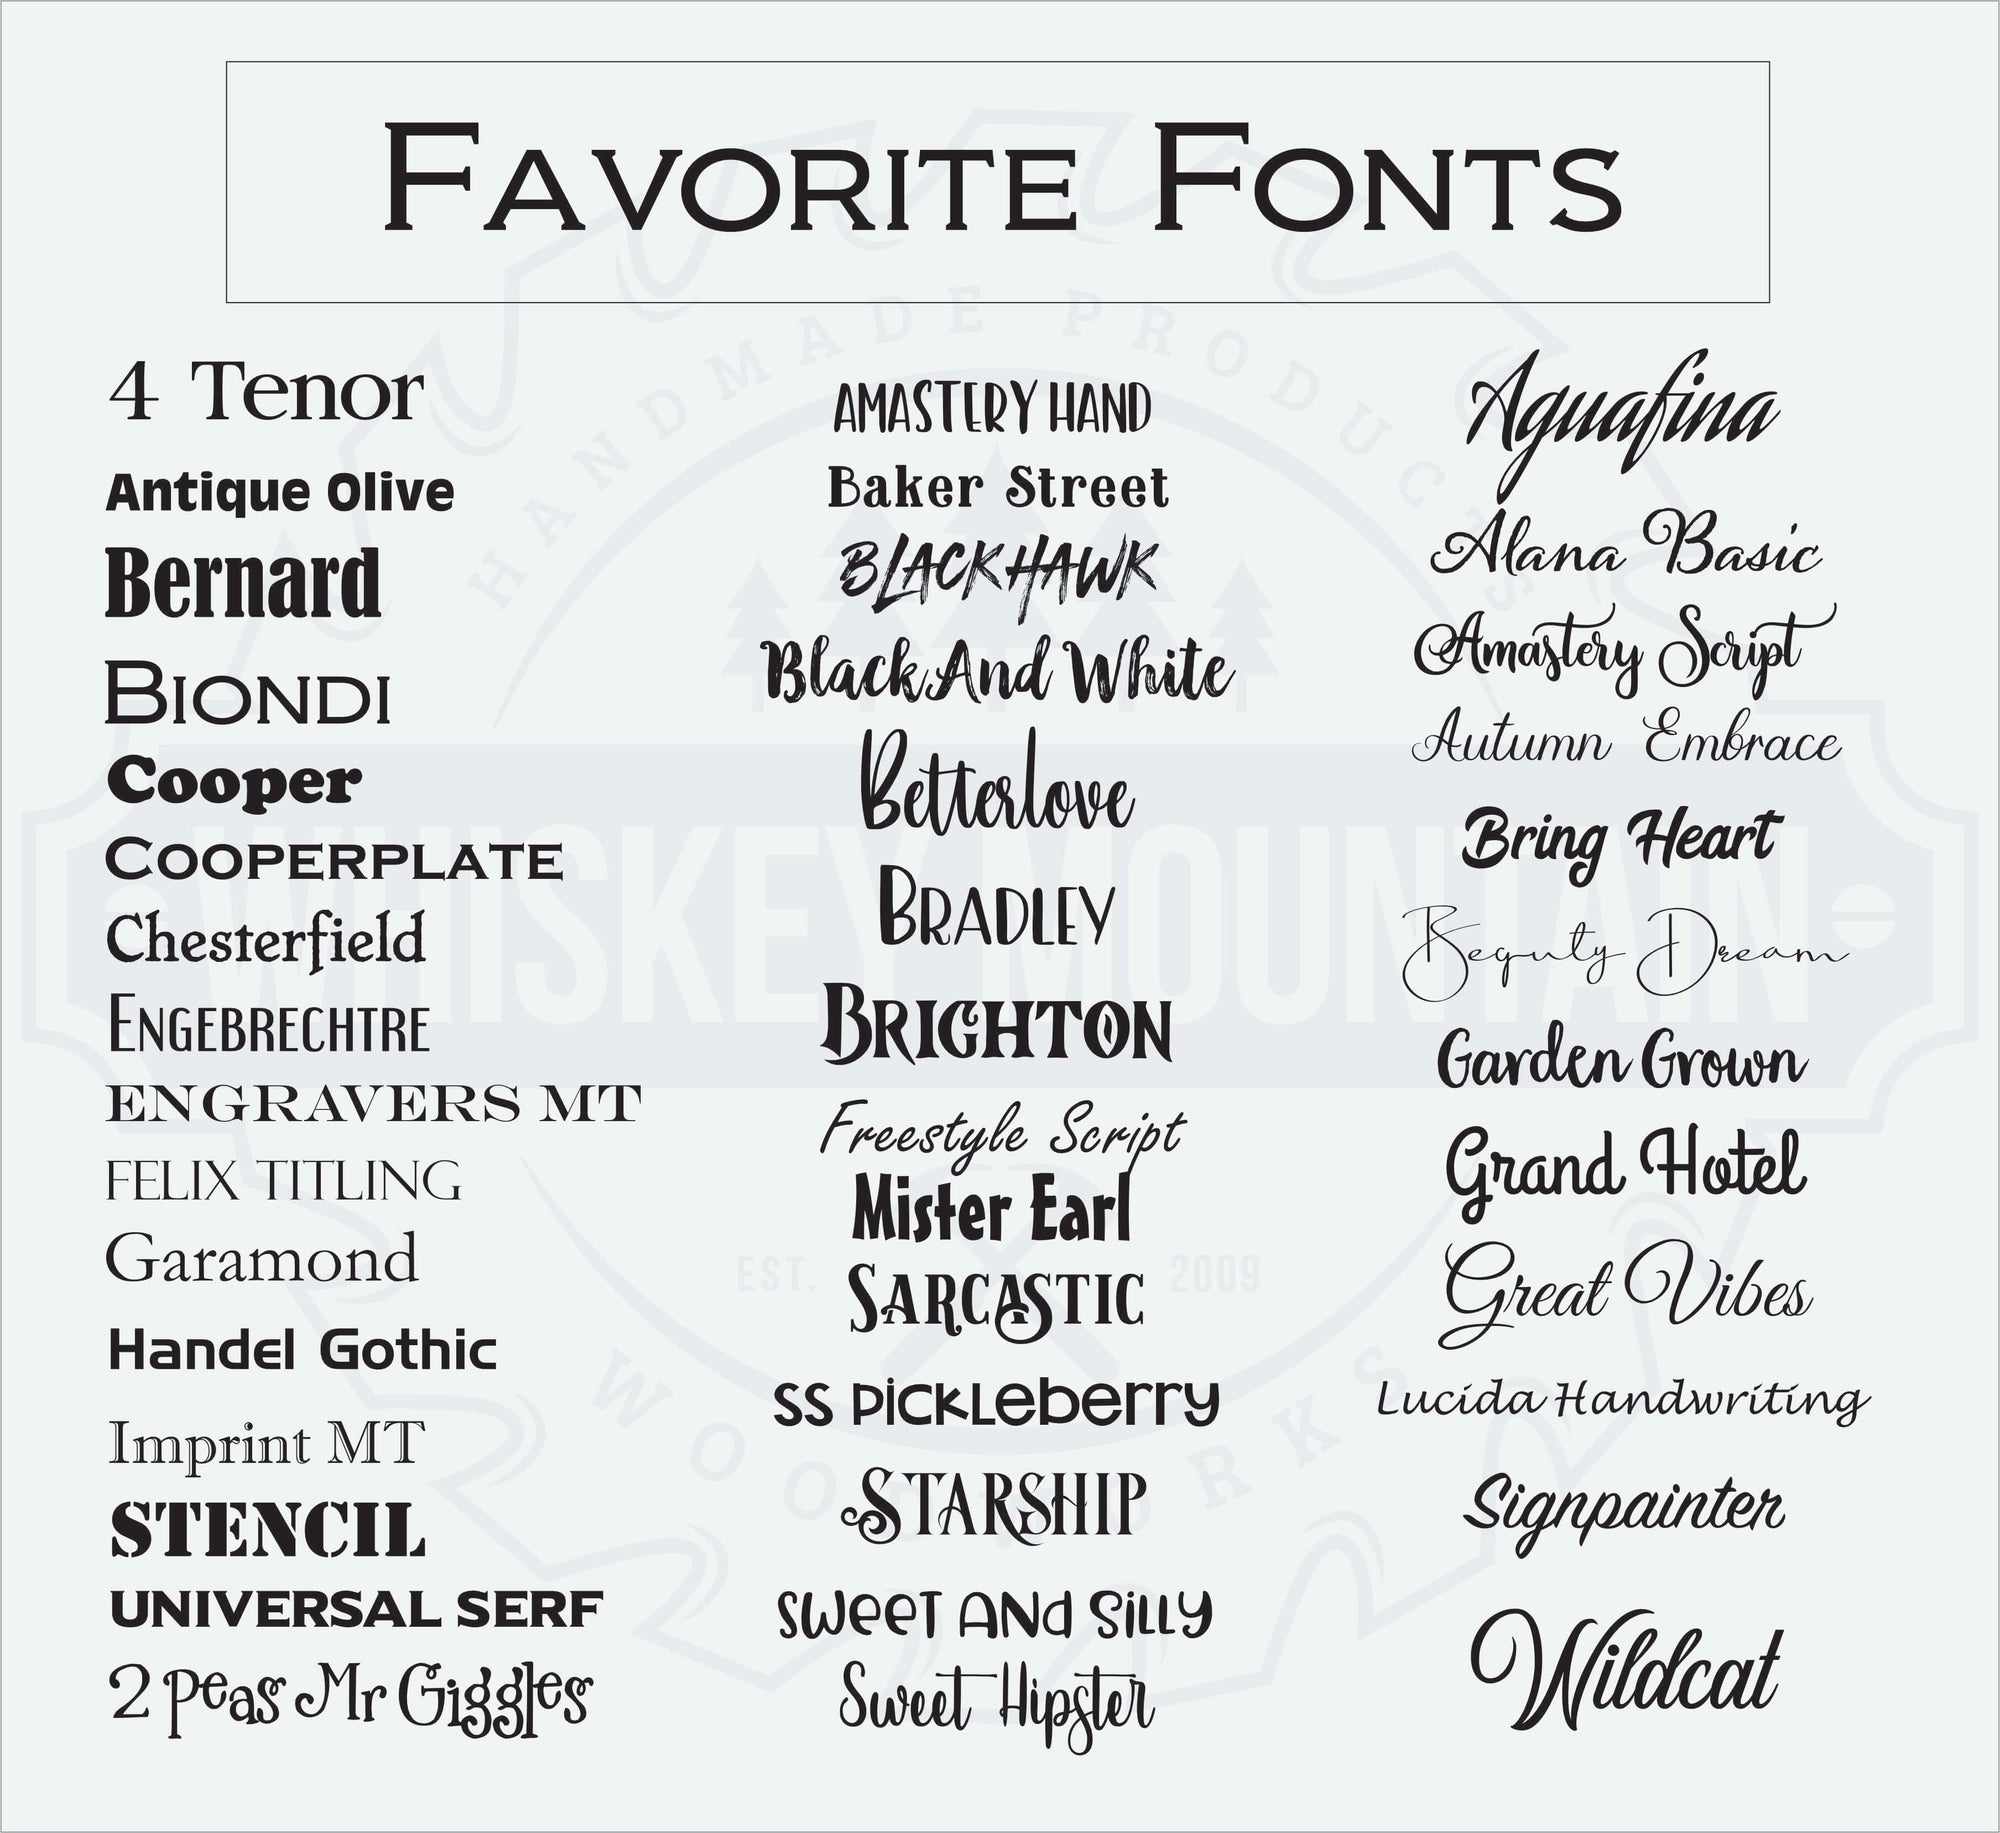 List of fonts available for customization on the goose wrap tumbler